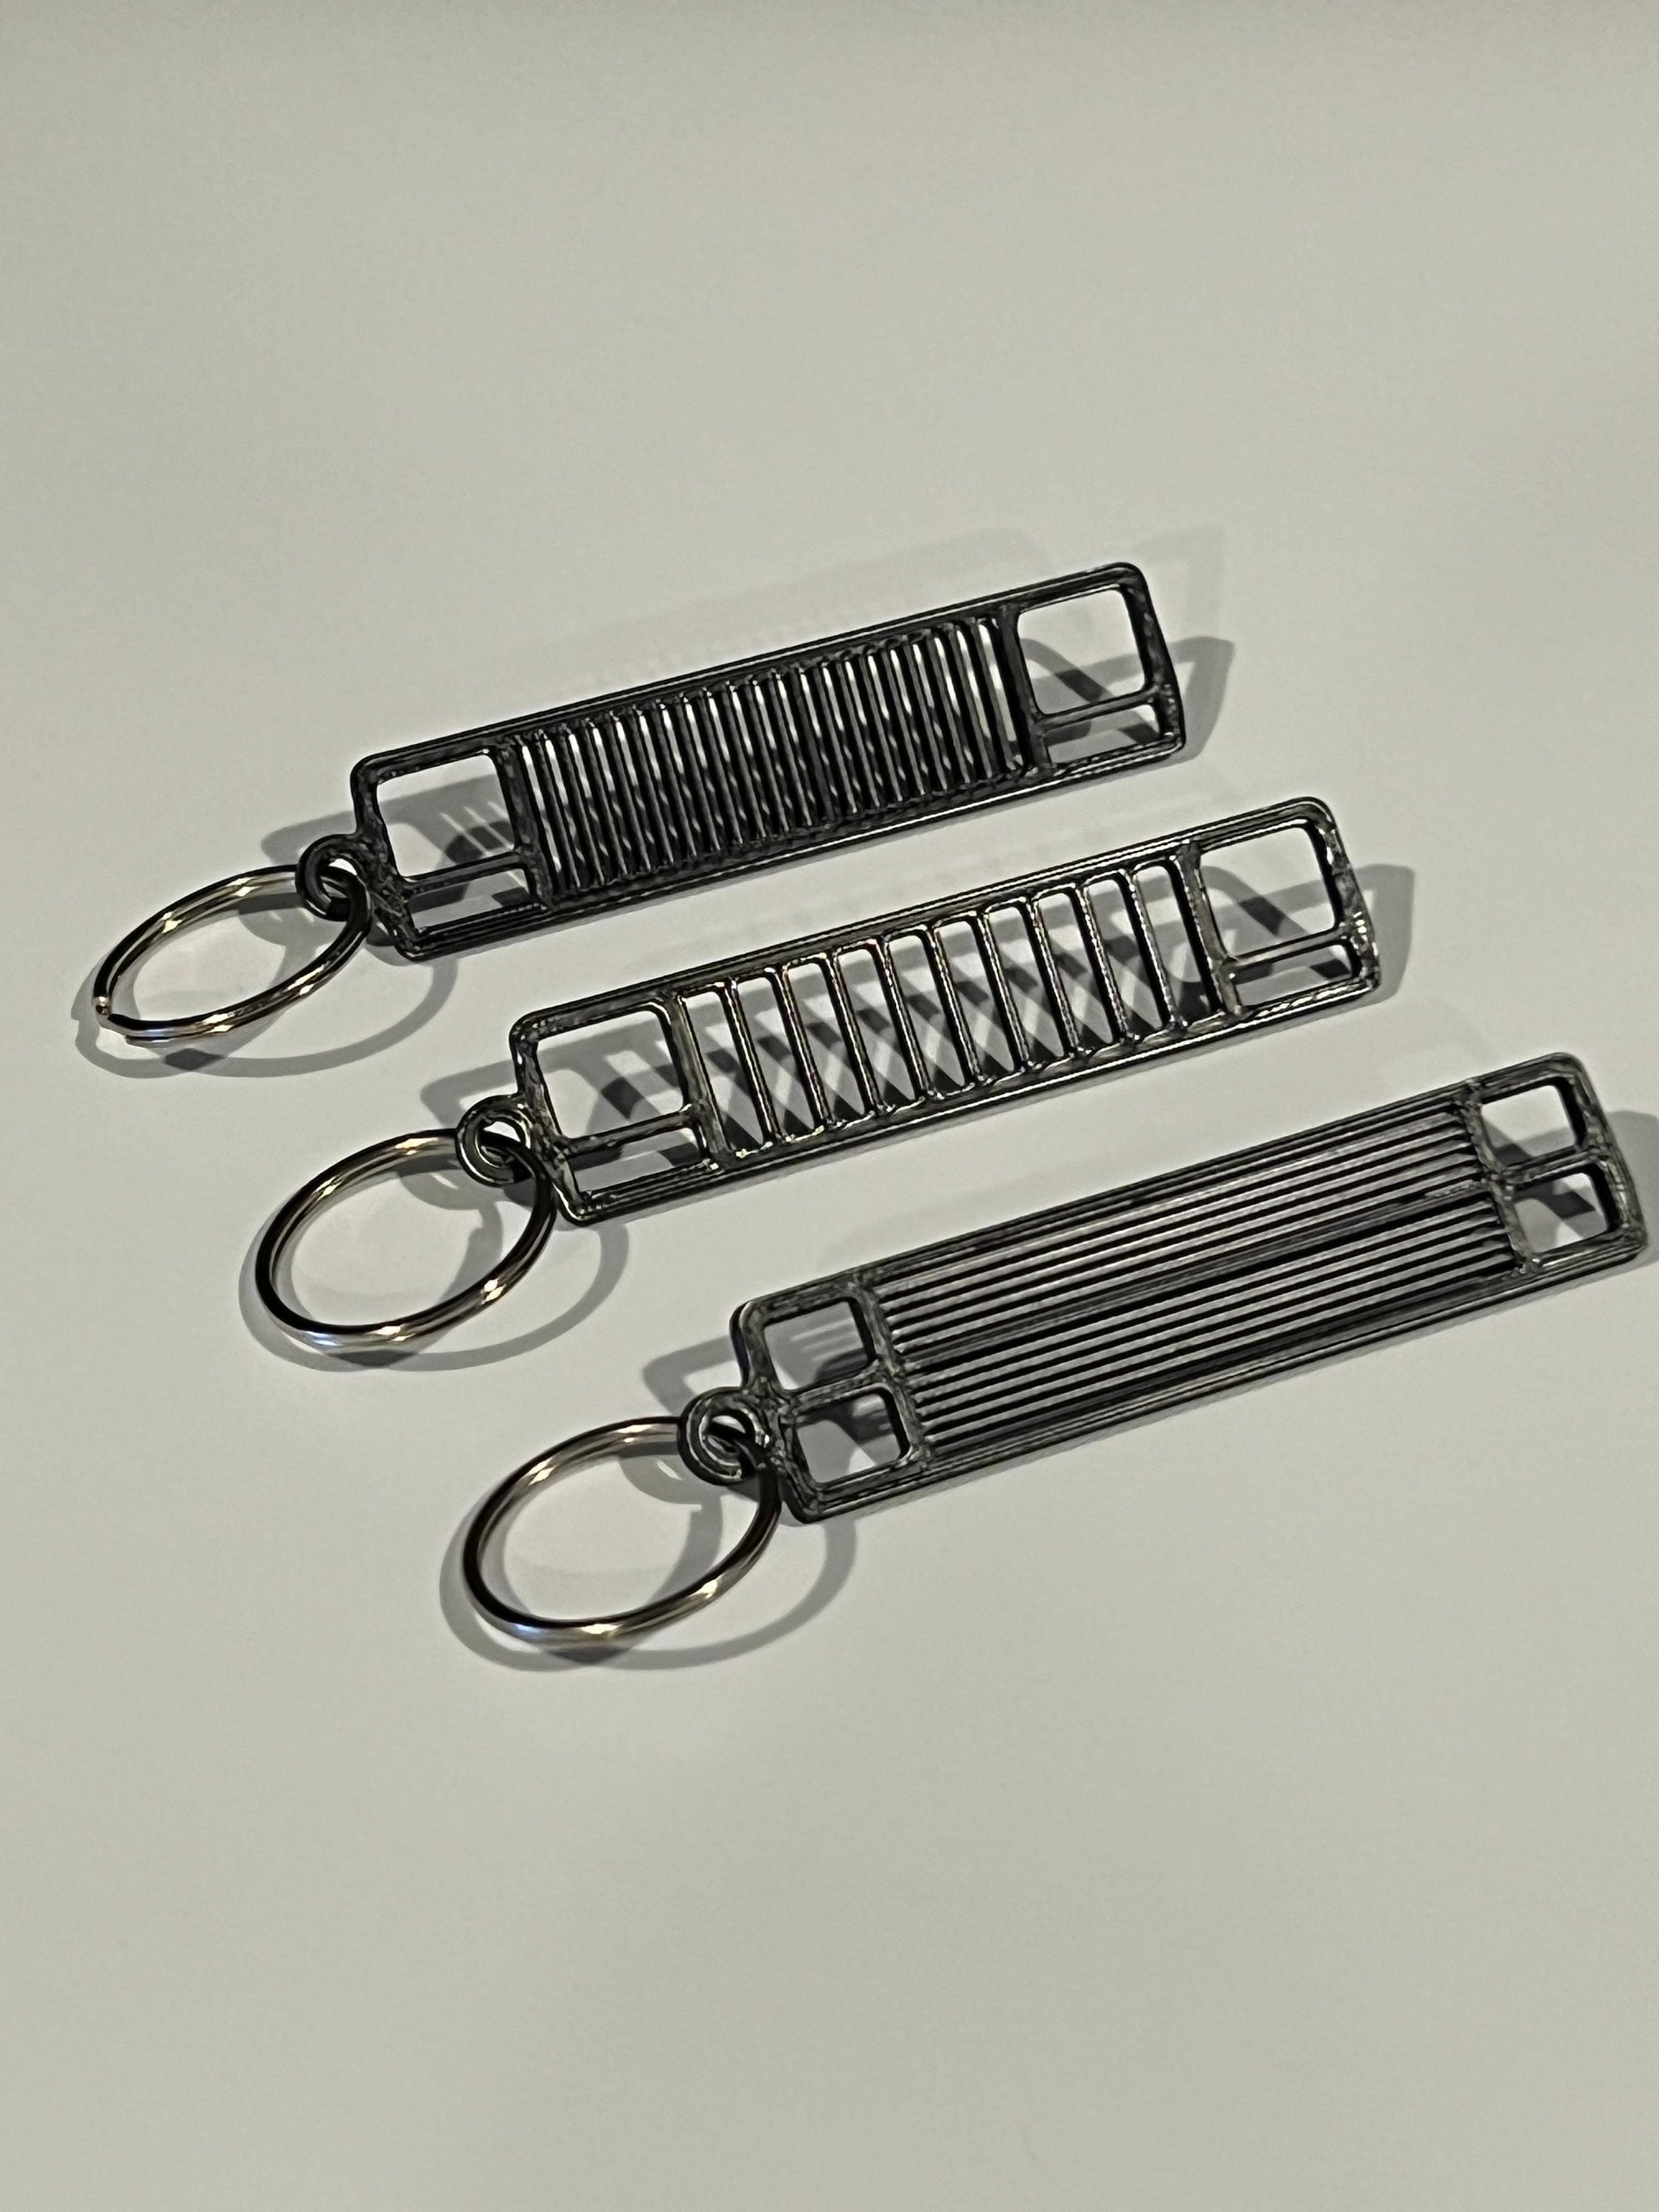 Boosted4point0s Jeep Wagoneer XJ Quad Headlight Grille Keychain